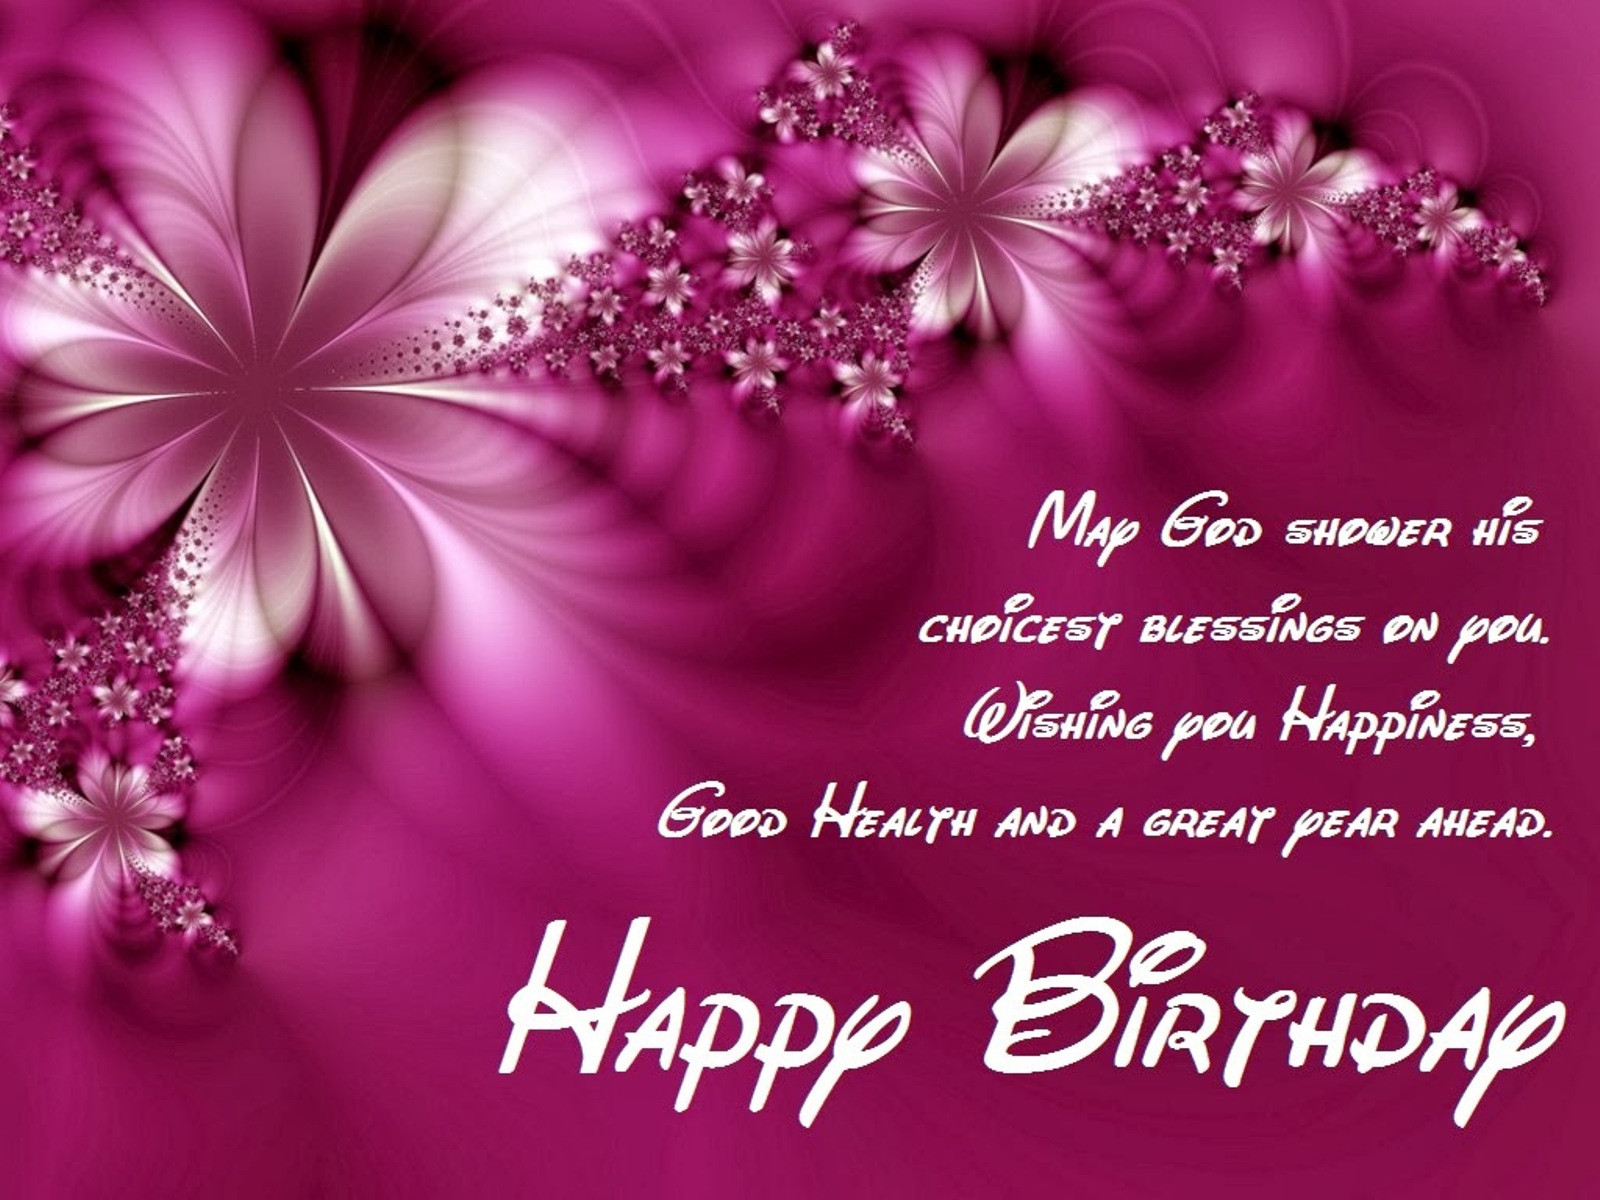 Birthday Wishes Quote
 The 50 Best Happy Birthday Quotes of All Time